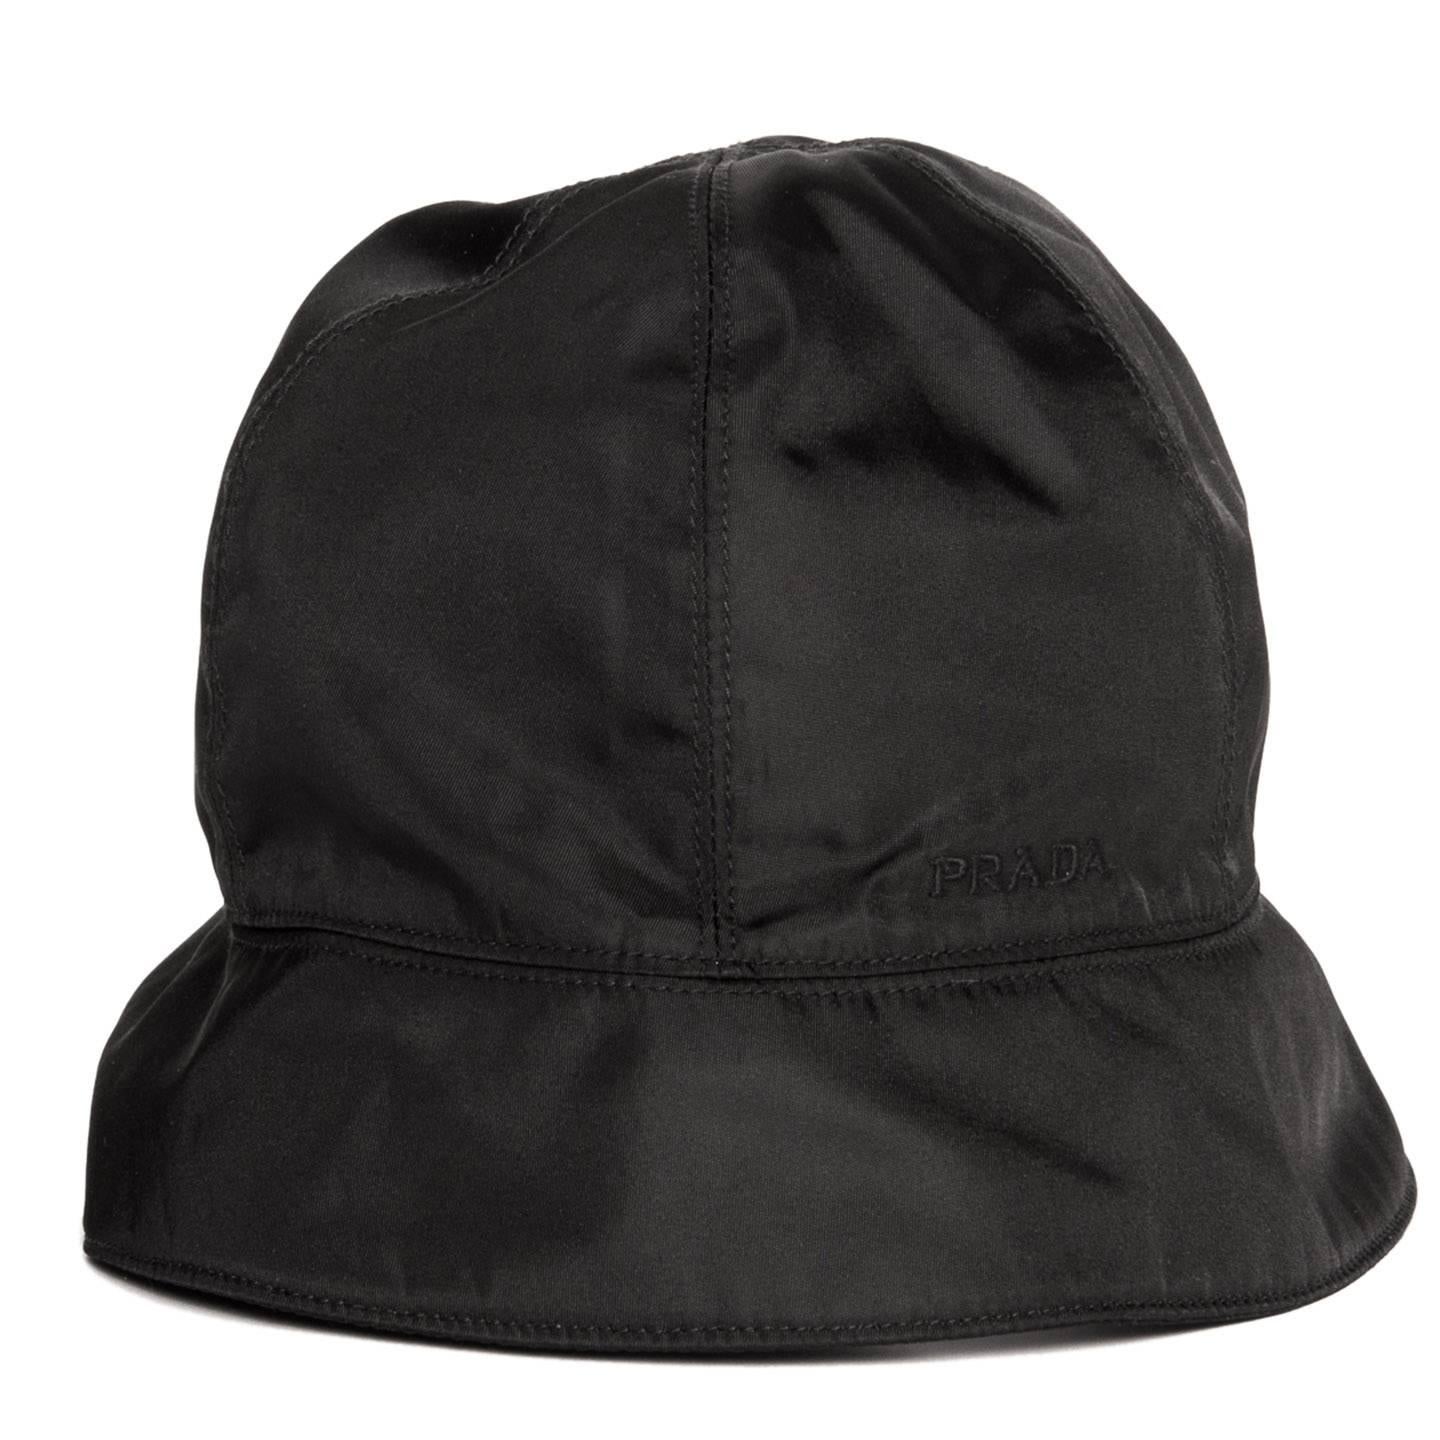 Prada Black nylon bucket cap divided in sections embellished with tone-on-tone top stitches, with a small brim and the Prada logo embroidered on the side.

Size  L Universal sizing

Condition  Excellent: never worn